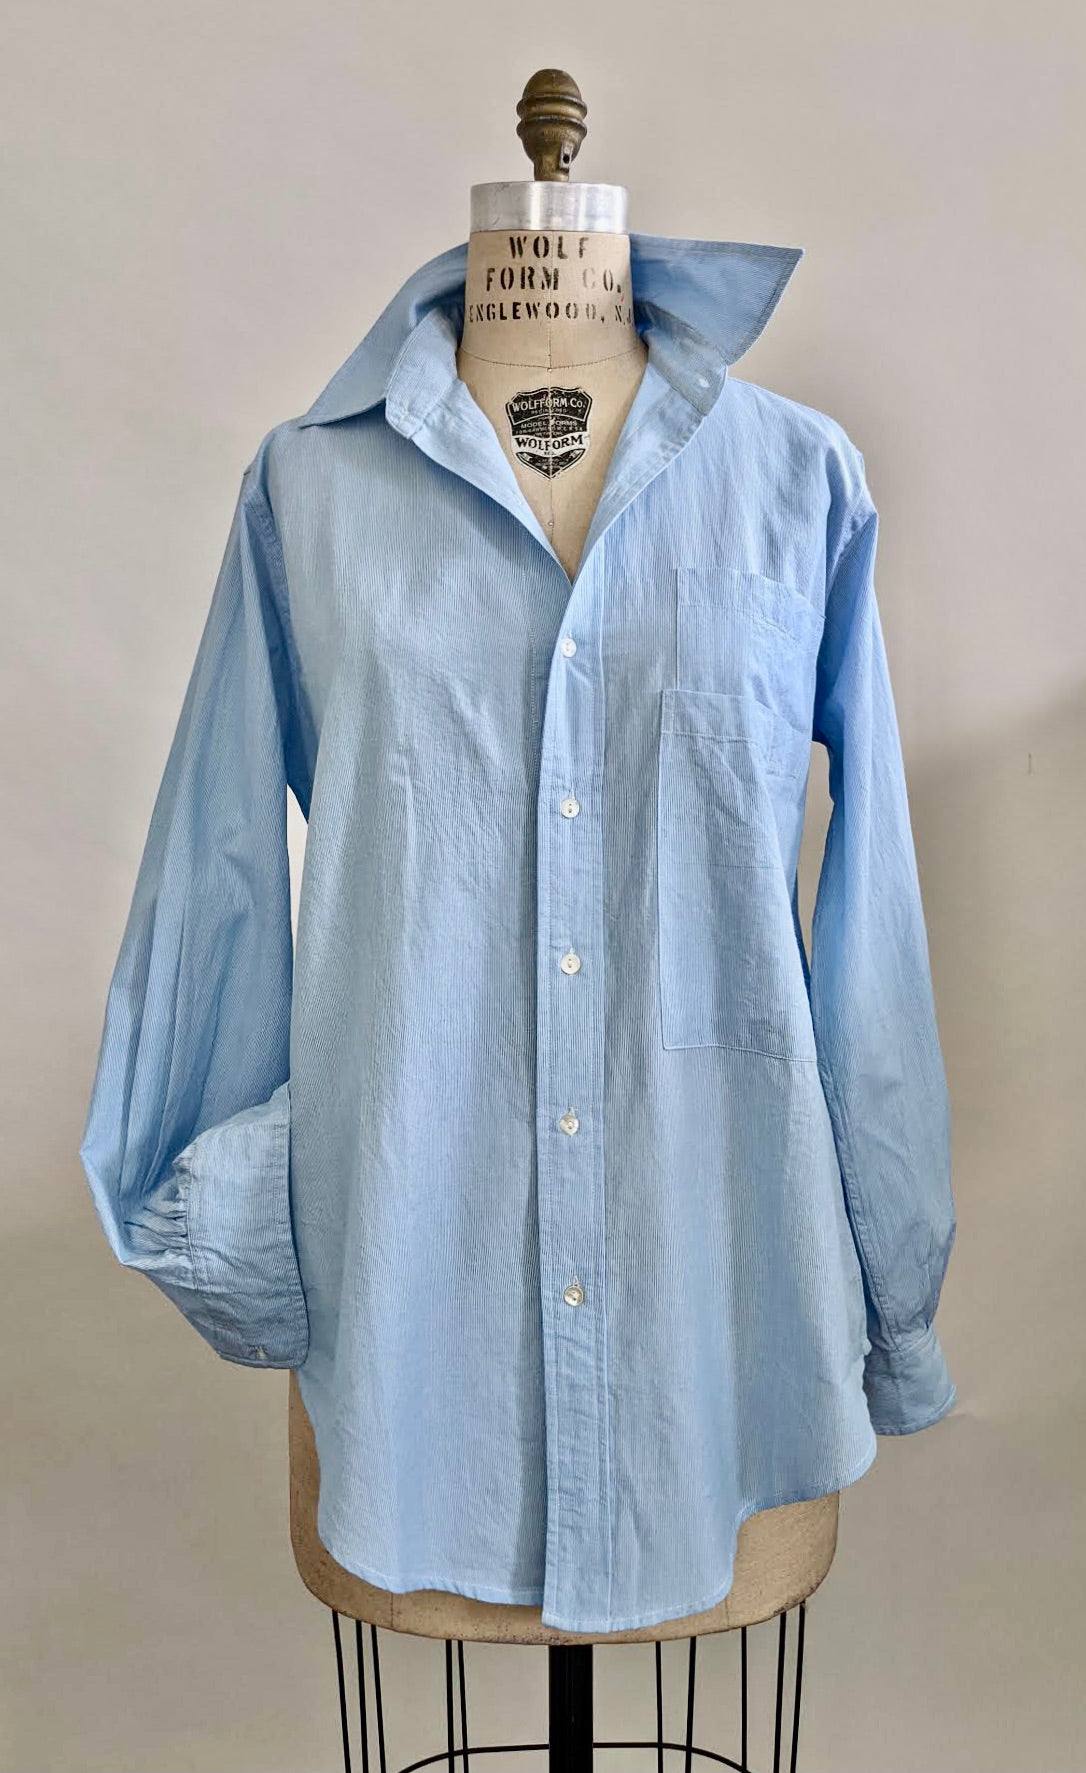 Maguire Shirt, Solid Blue/White Stripe